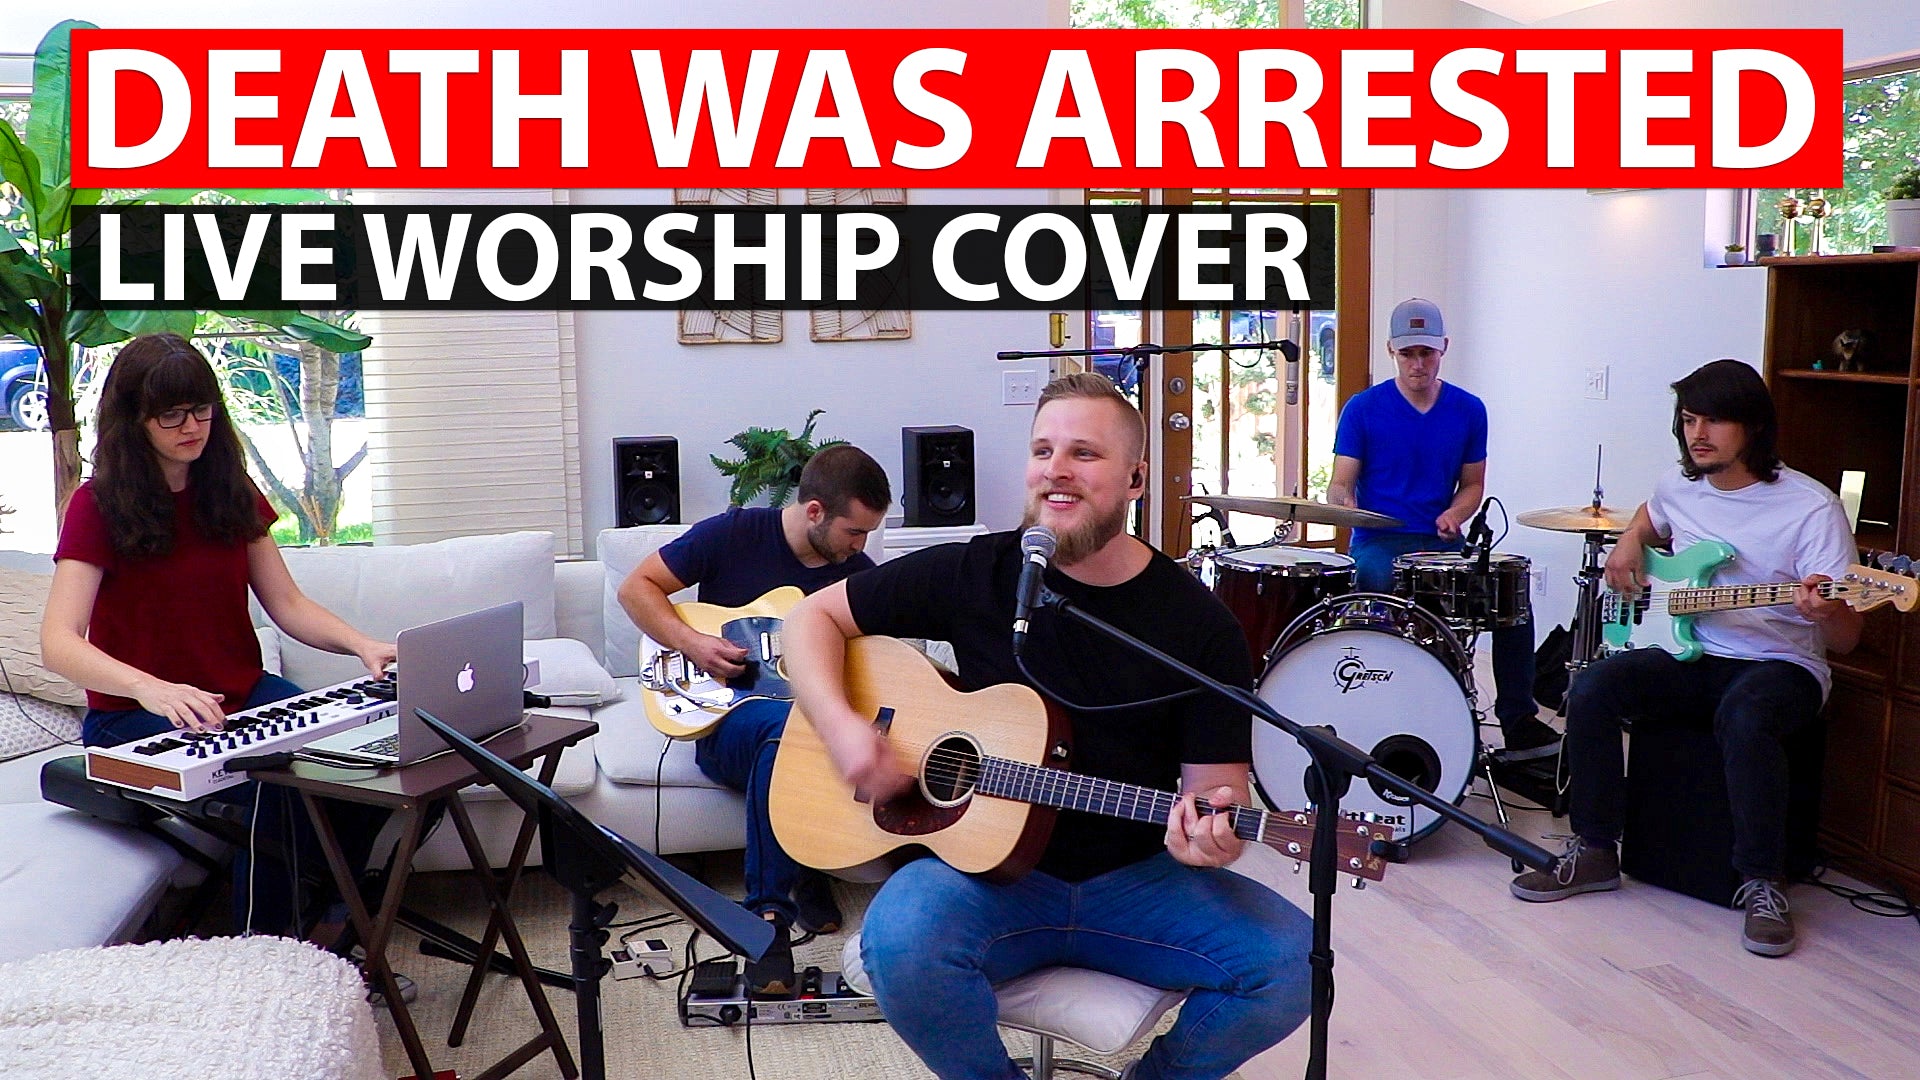 Death Was Arrested - Live Worship Cover by Team Sunday Sounds